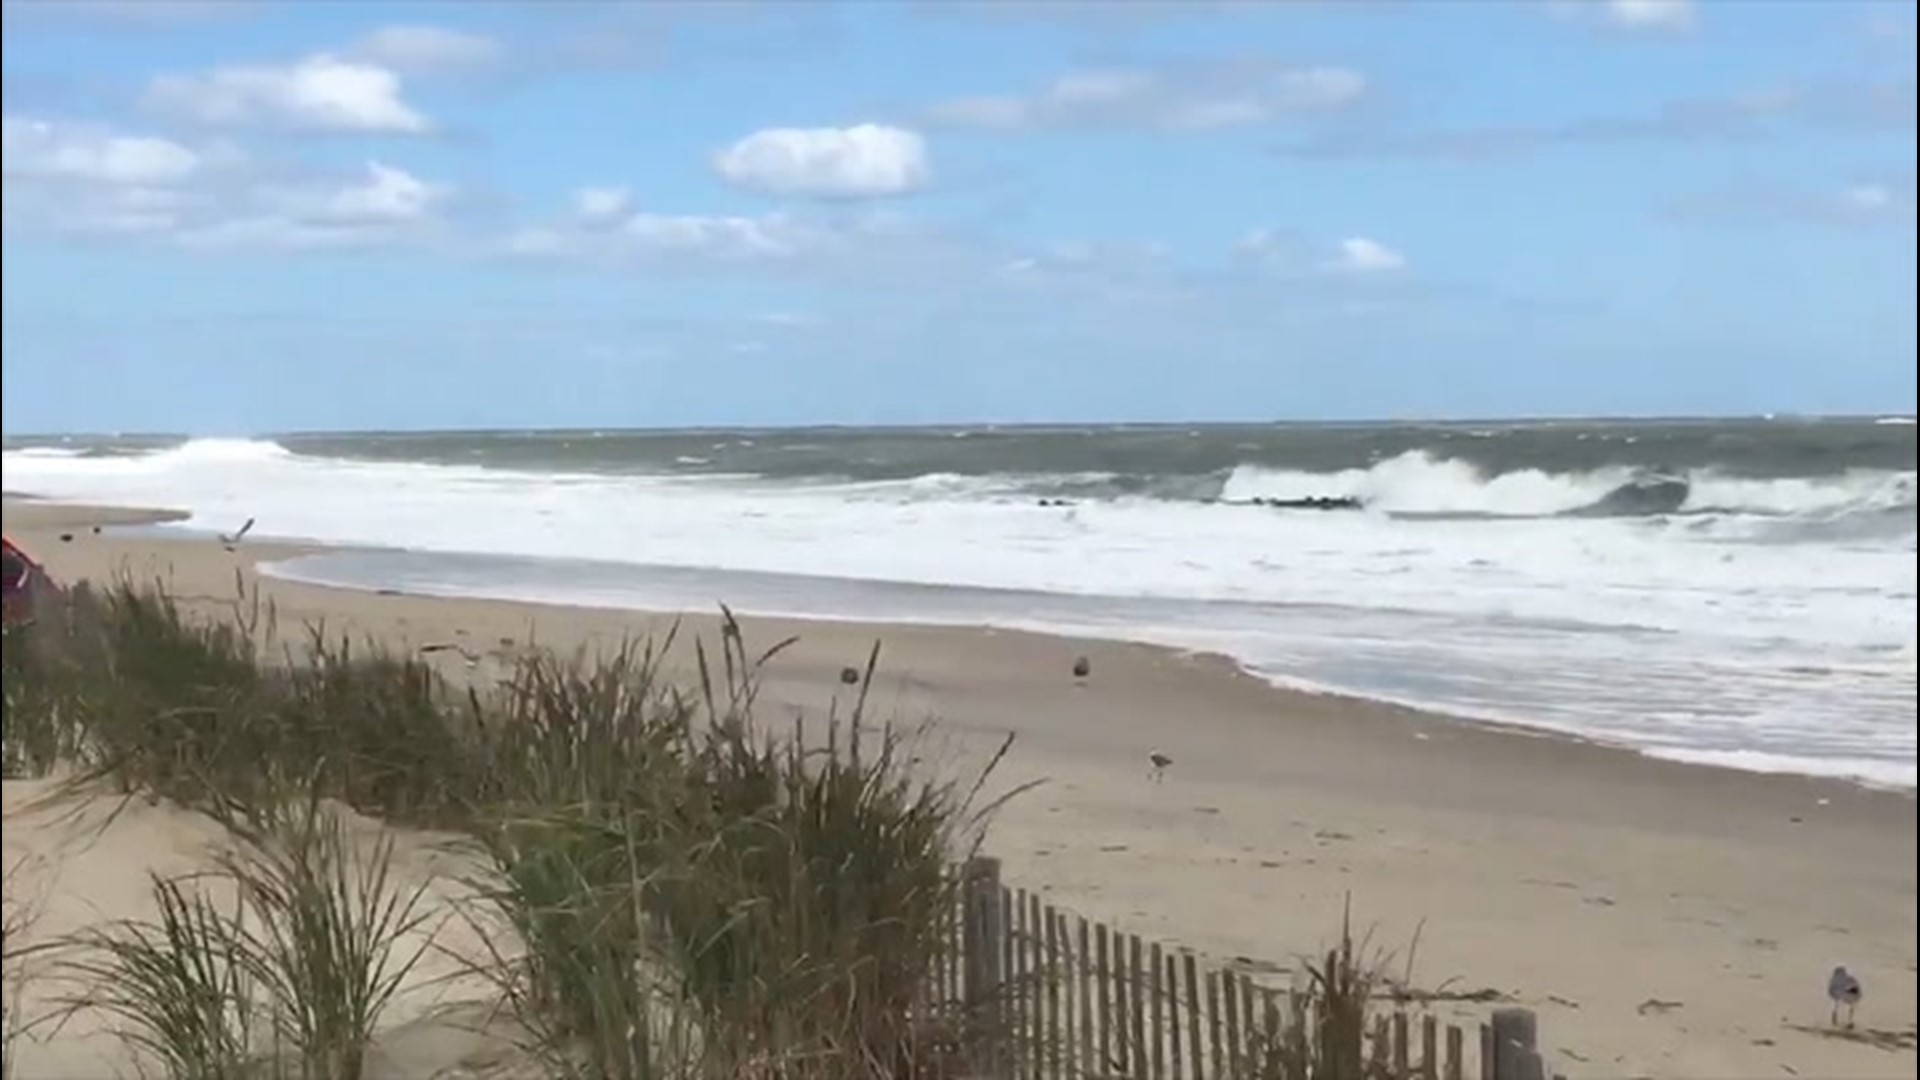 In Rohoboth, Delaware, the ocean was rough and choppy on Sept. 21, thanks to Hurricane Teddy looming offshore.